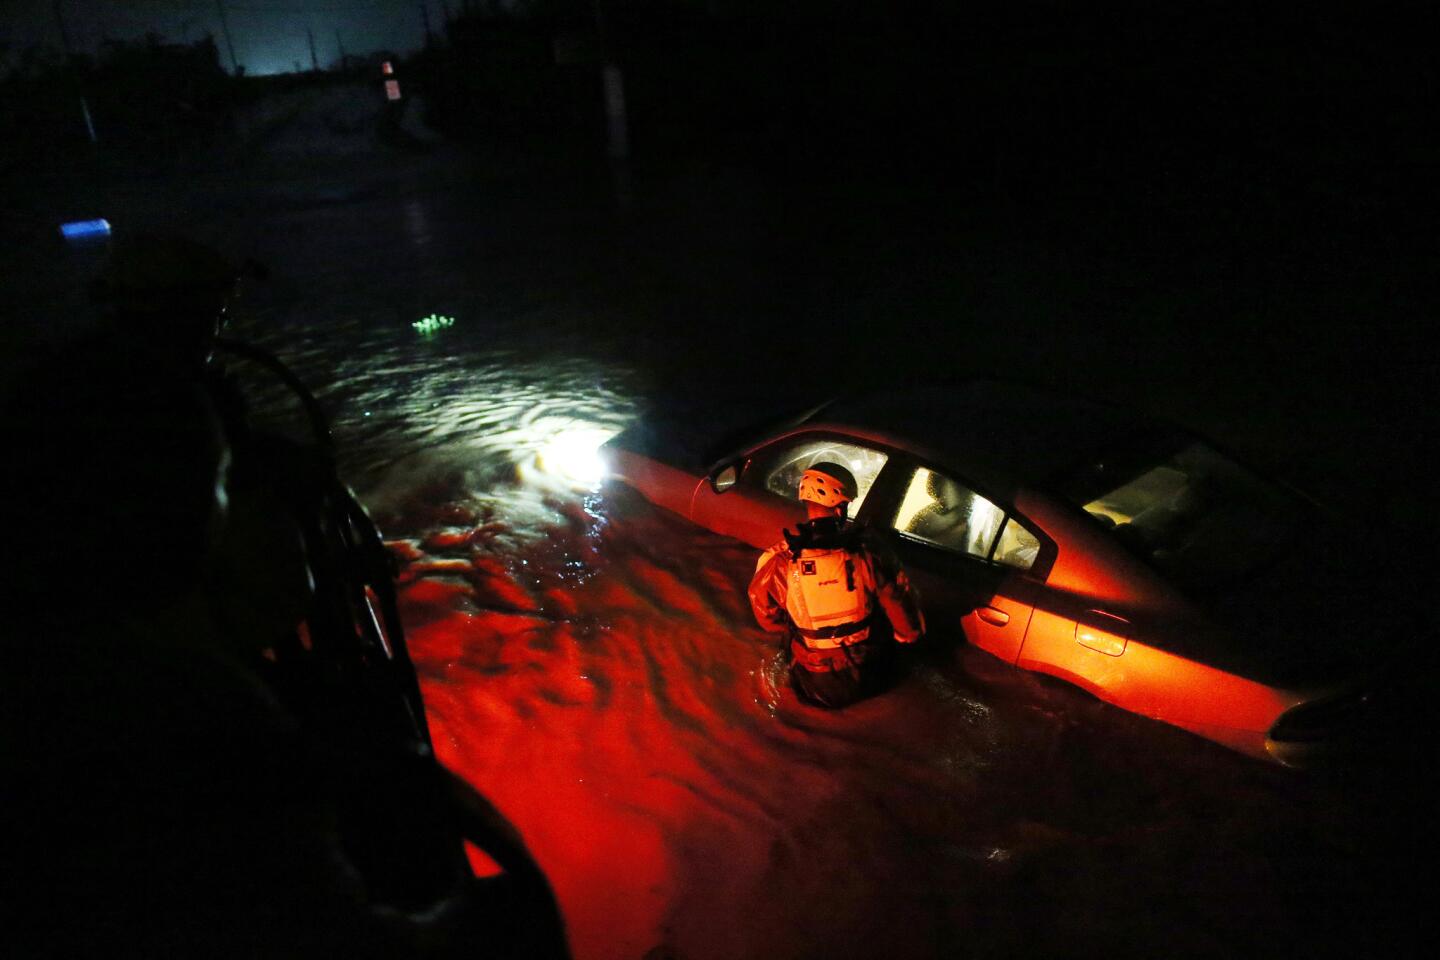 A rescue team inspects flooded areas after the passing of Hurricane Irma on Sept. 6, 2017, in Fajardo, Puerto Rico.